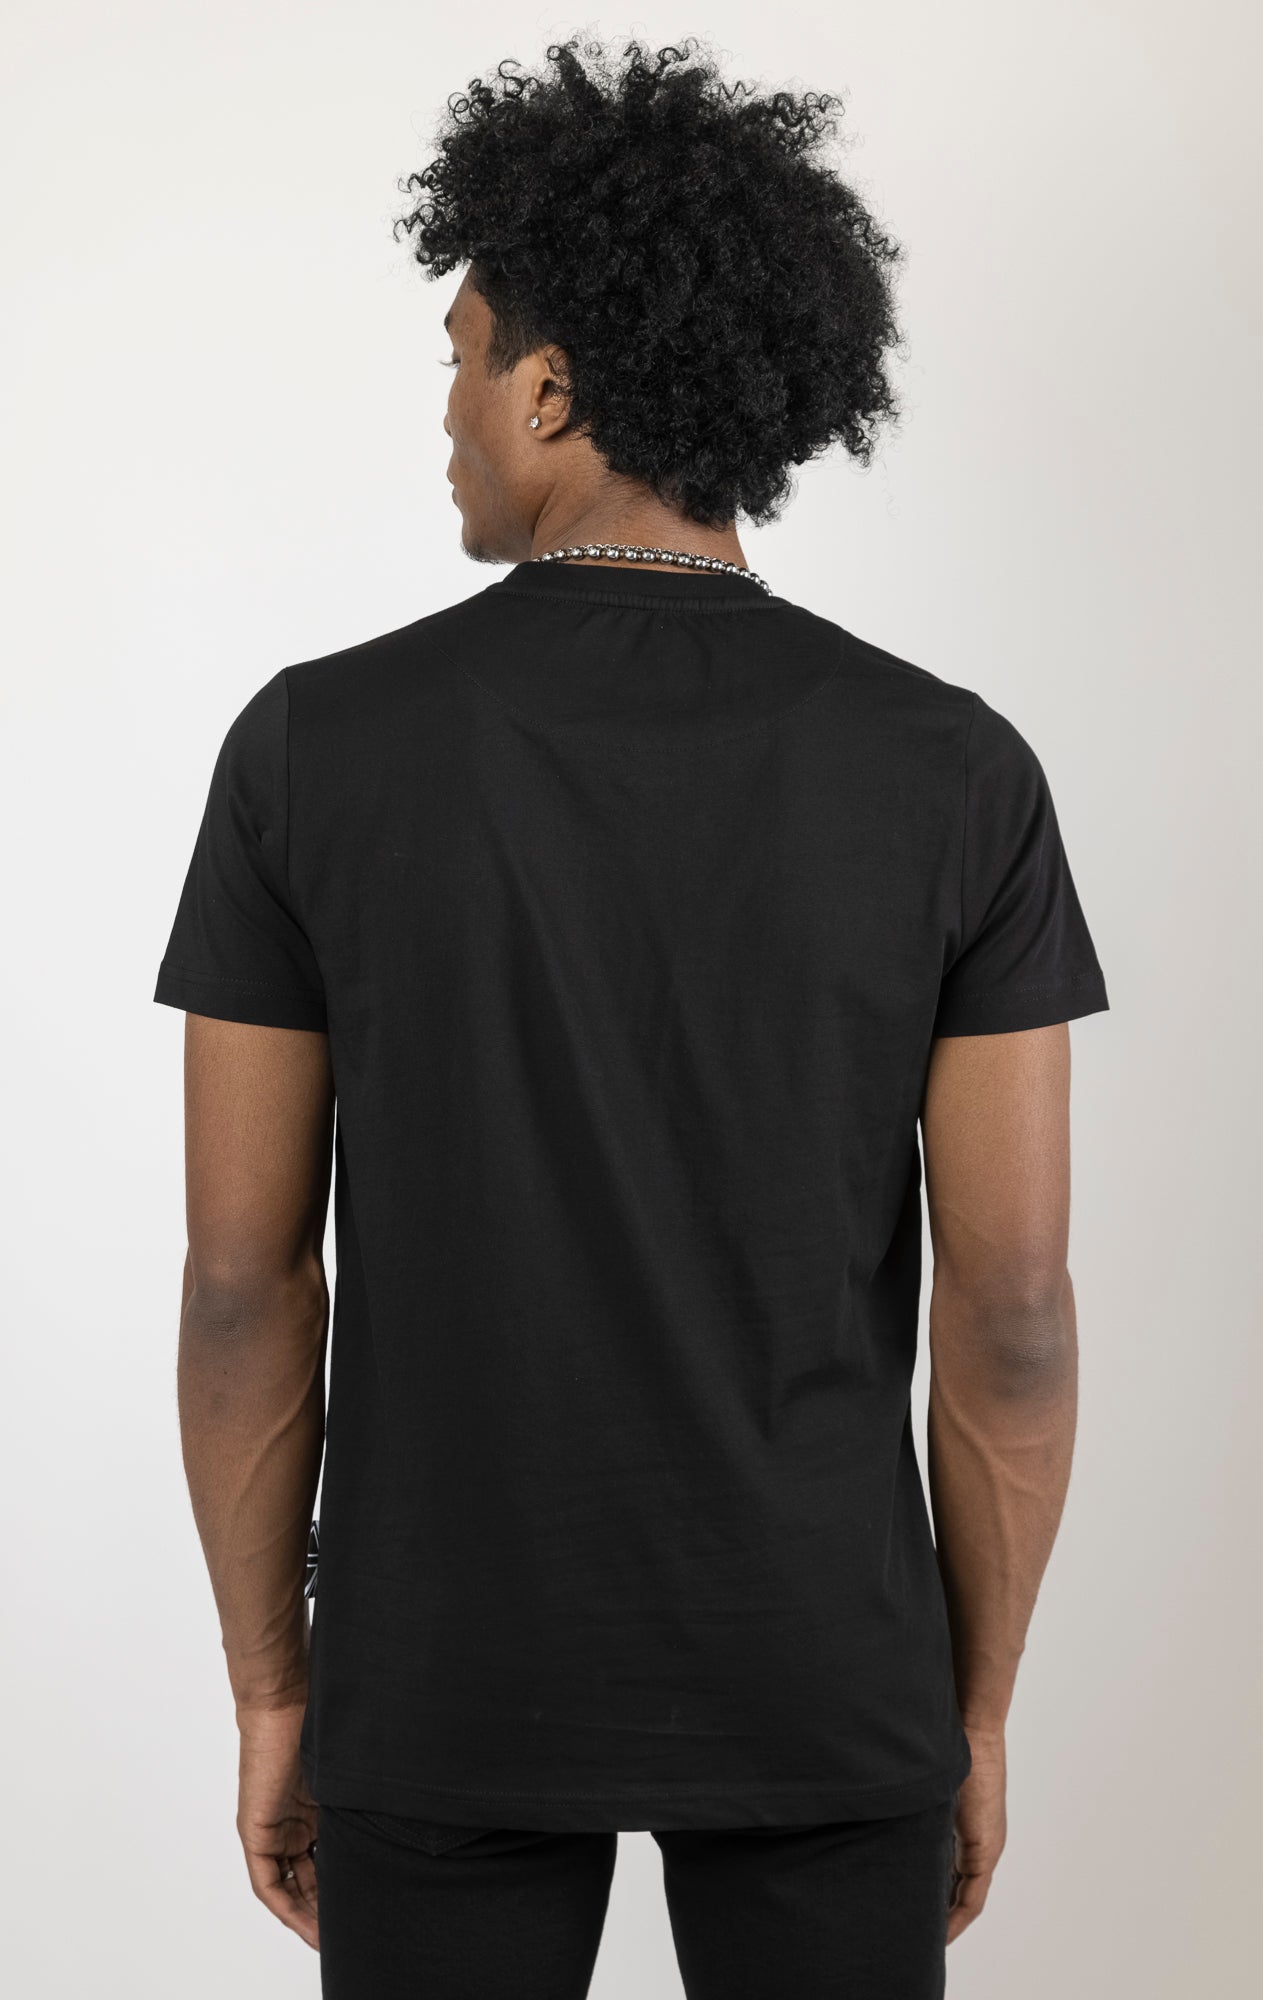 Black Men's regular fit t-shirt in a variety of colors. The shirt features a slightly elongated sleeve, a fitted neckline, and a straight body. It has a 